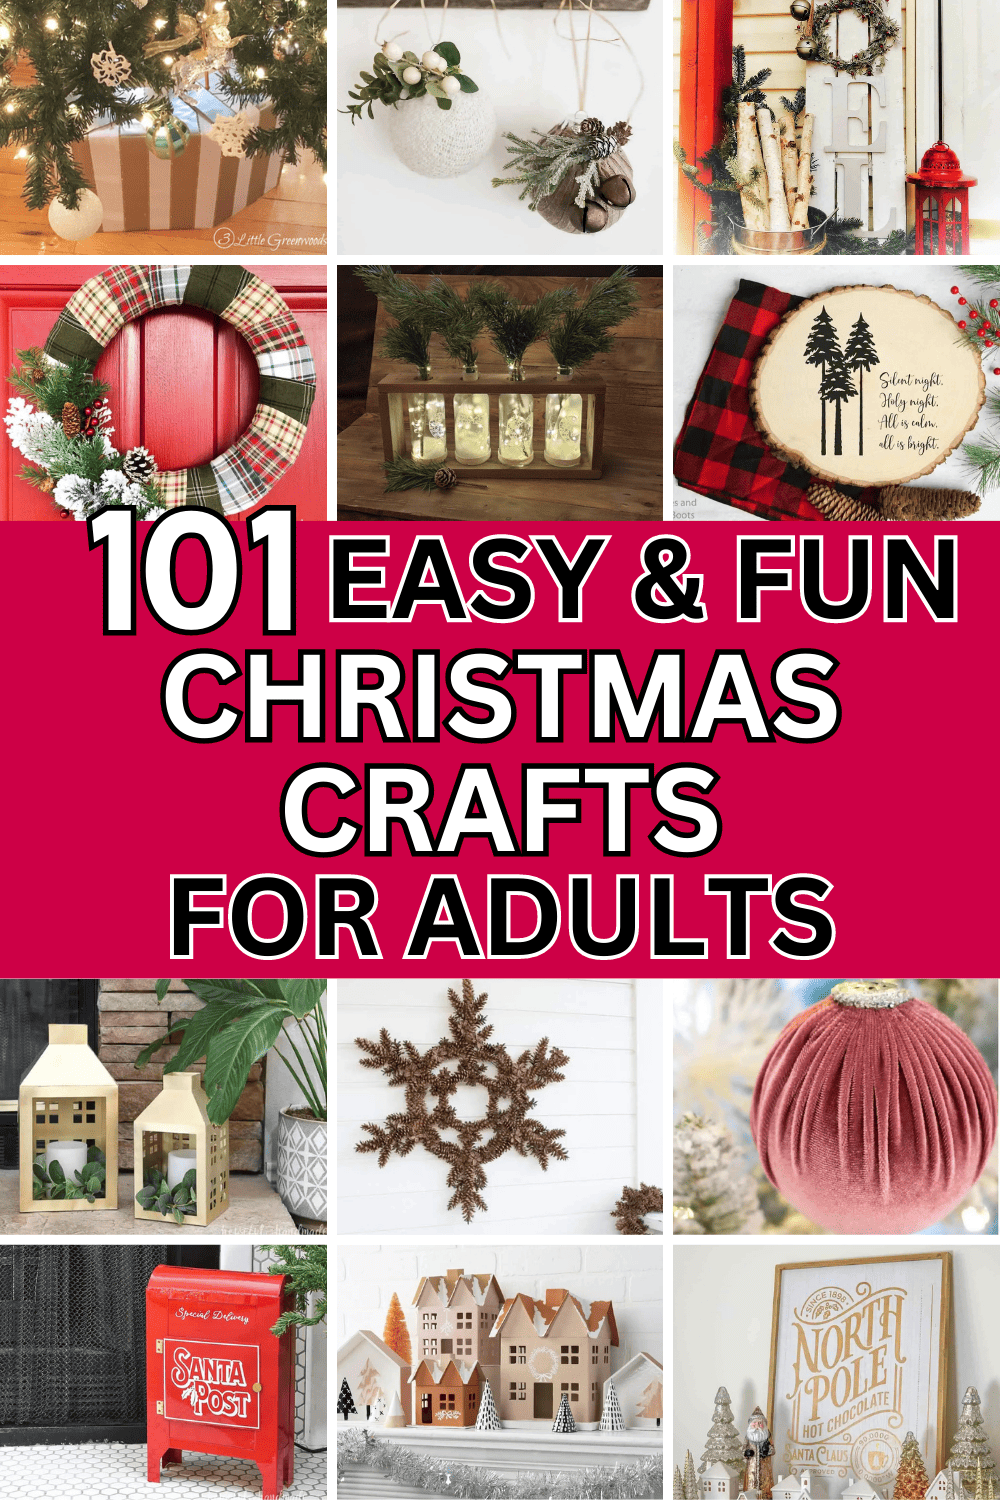 101 Festive & Fun Christmas Crafts for Adults (to sell, gift, or